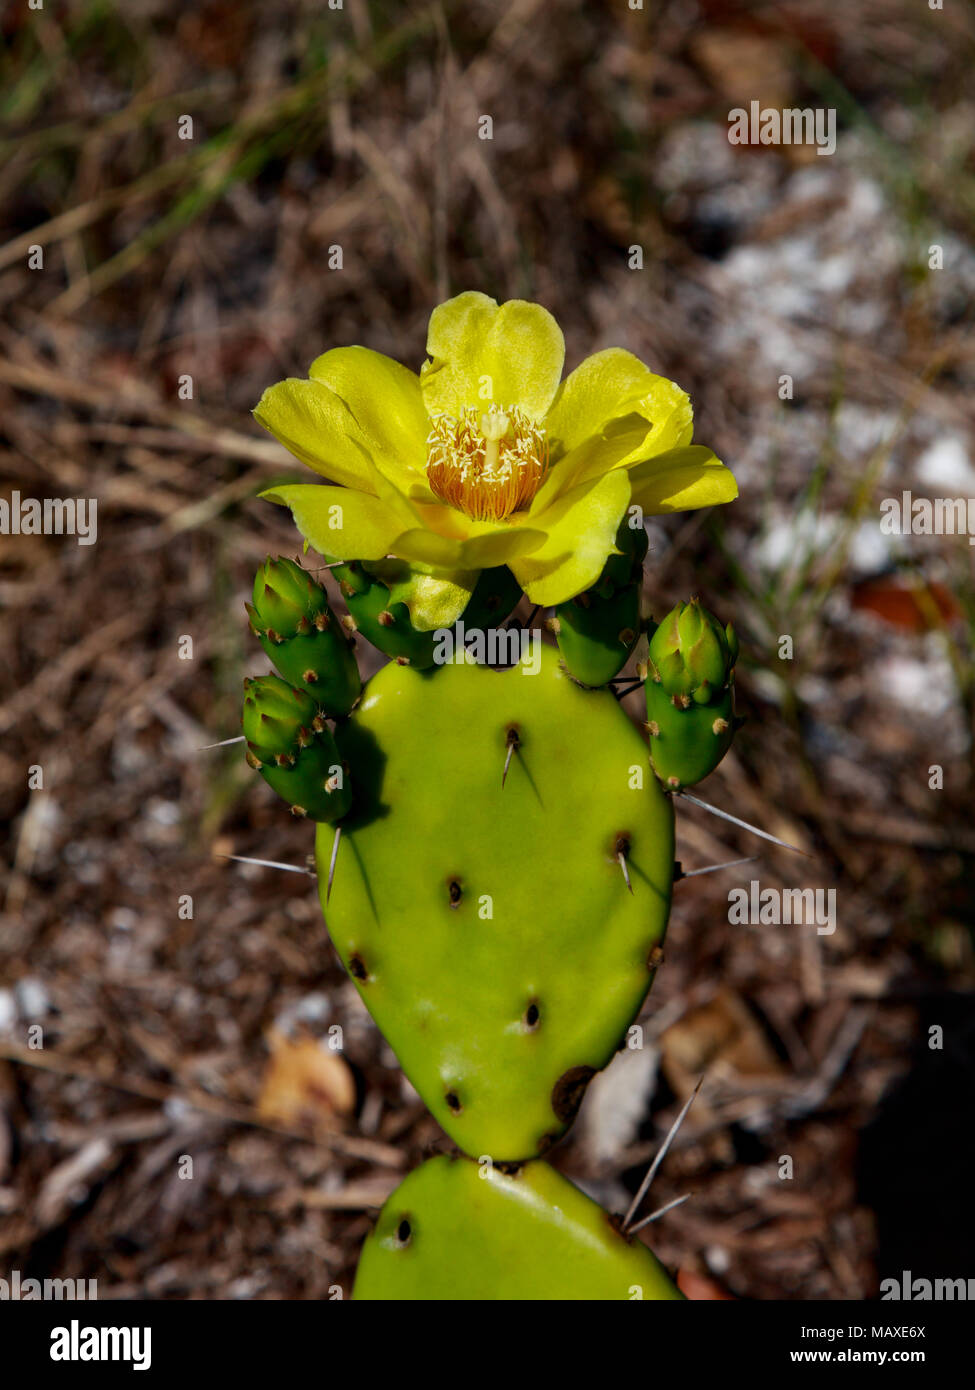 Cactus (opuntia phaecantha) with three blossoms in natural environment, stand upright, Sanibel Island, Florida, USA Stock Photo